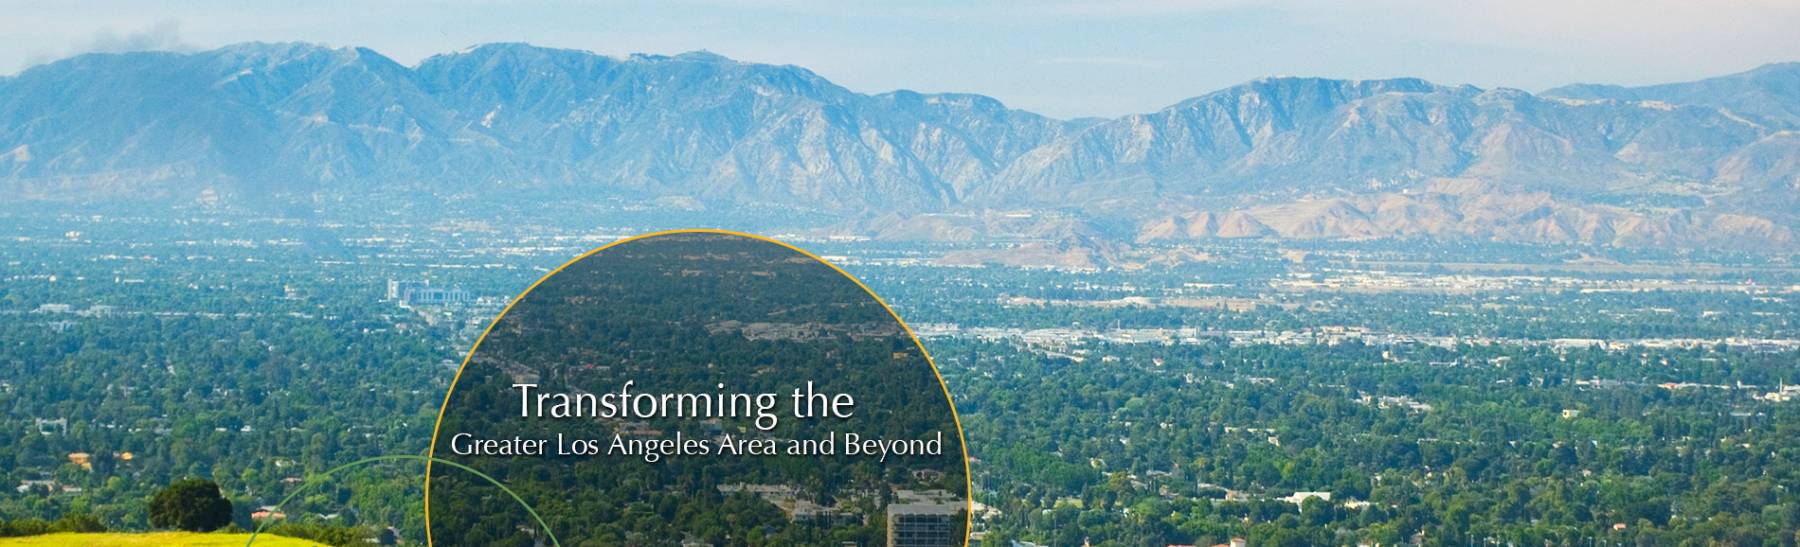 Transforming the greater Los Angeles area and beyond.